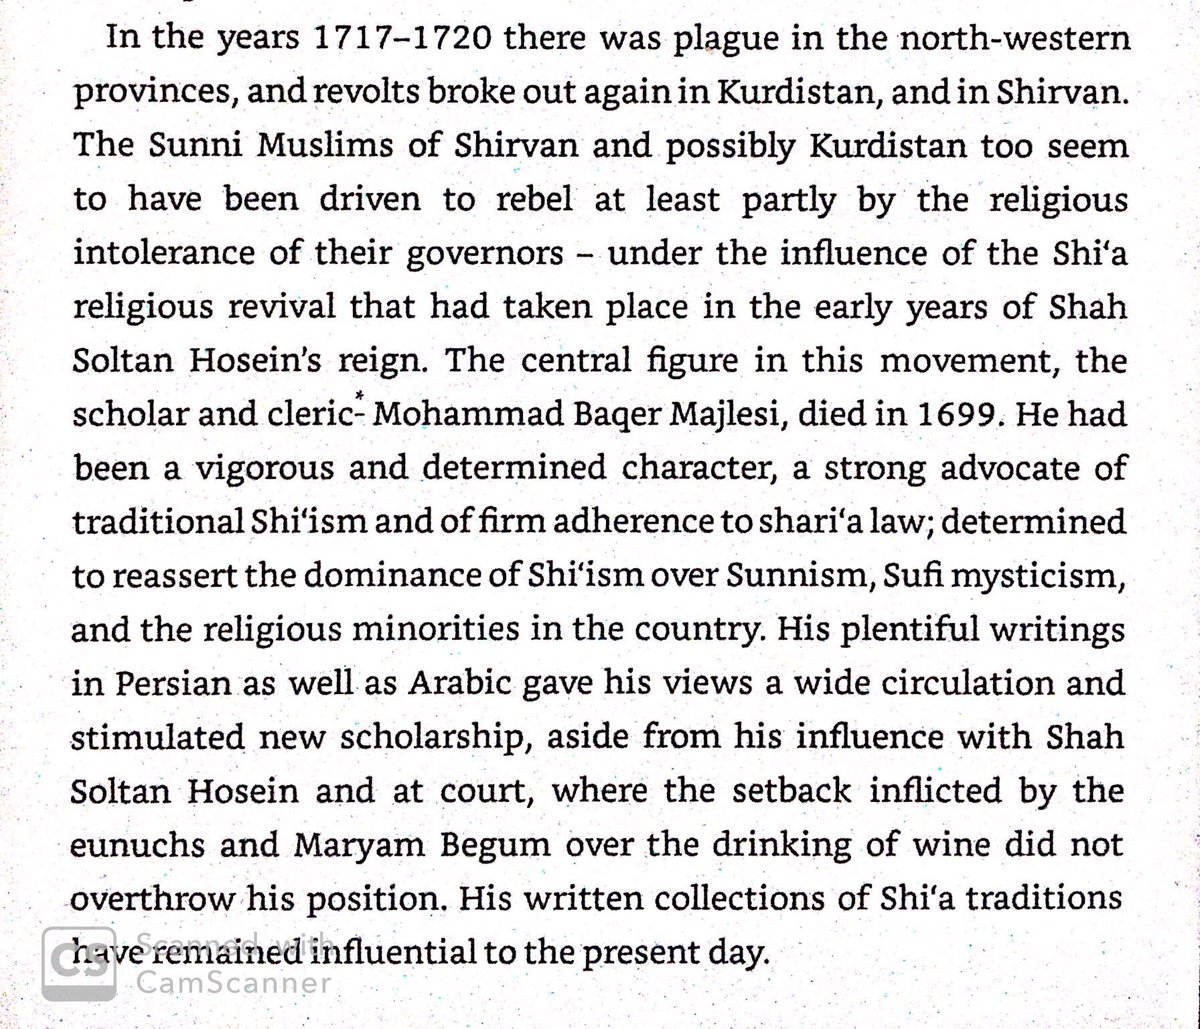 By 1720, the situation had worsened. Azeris & Kurds in the west rebelled - embittered by religious persecution